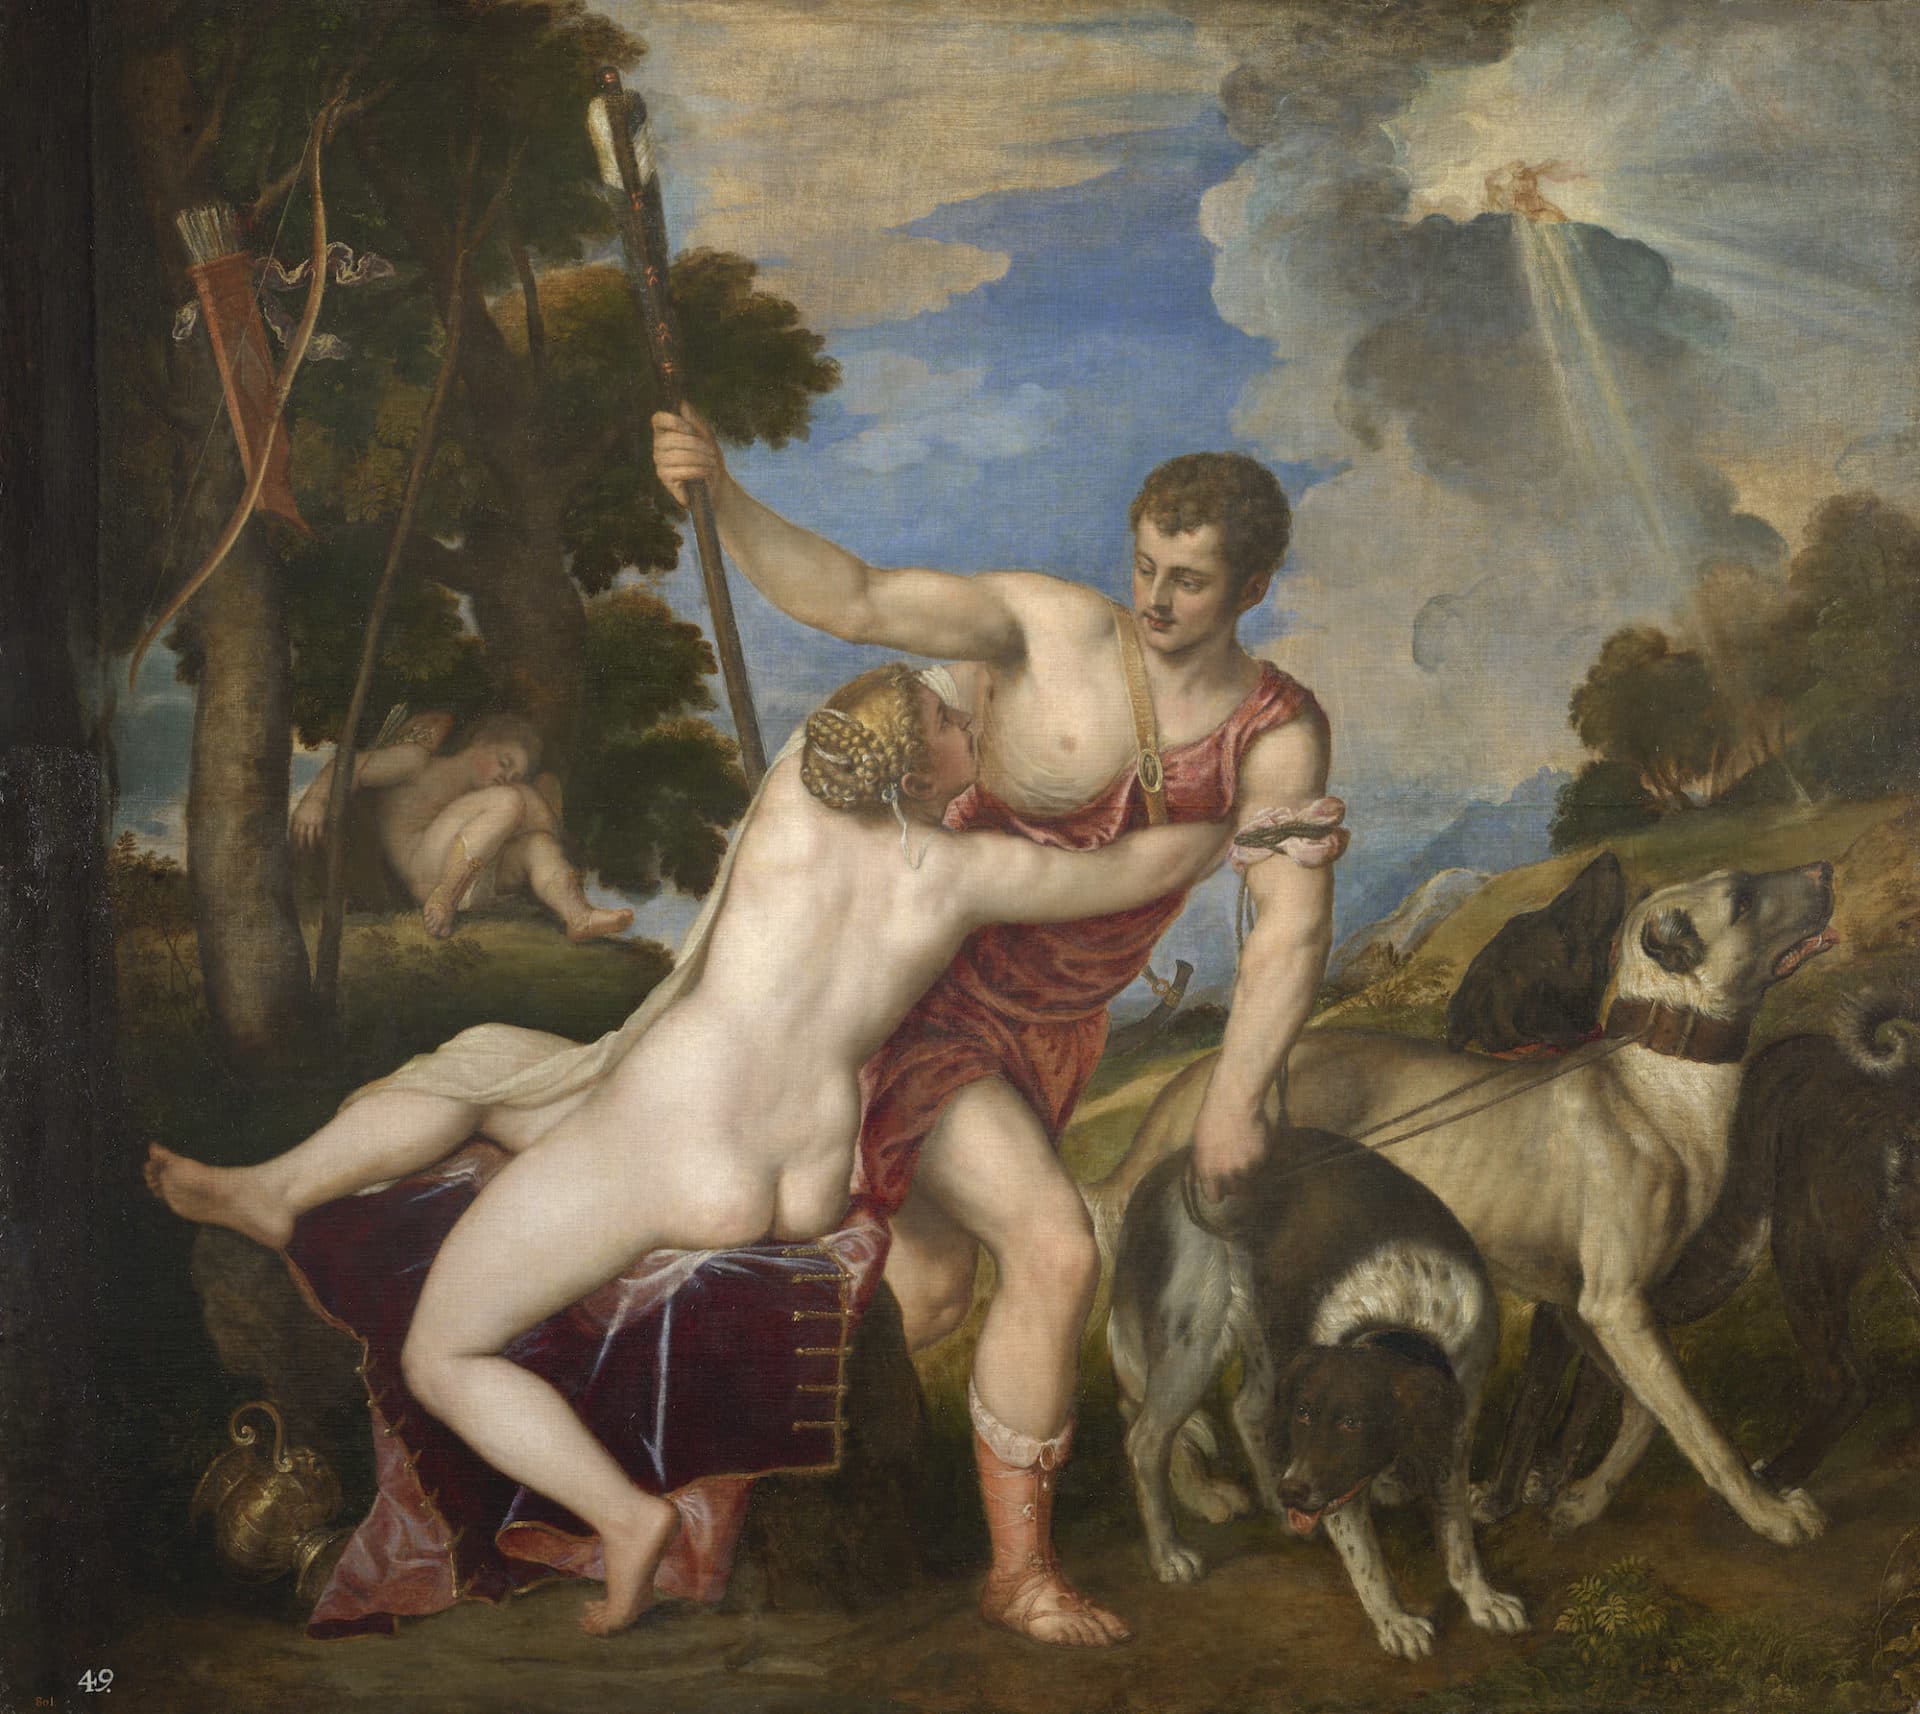 &quot;Venus and Adonis&quot; (about 1553–1554) by Titian. (Courtesy Museo Nacional del Prado, Madrid)